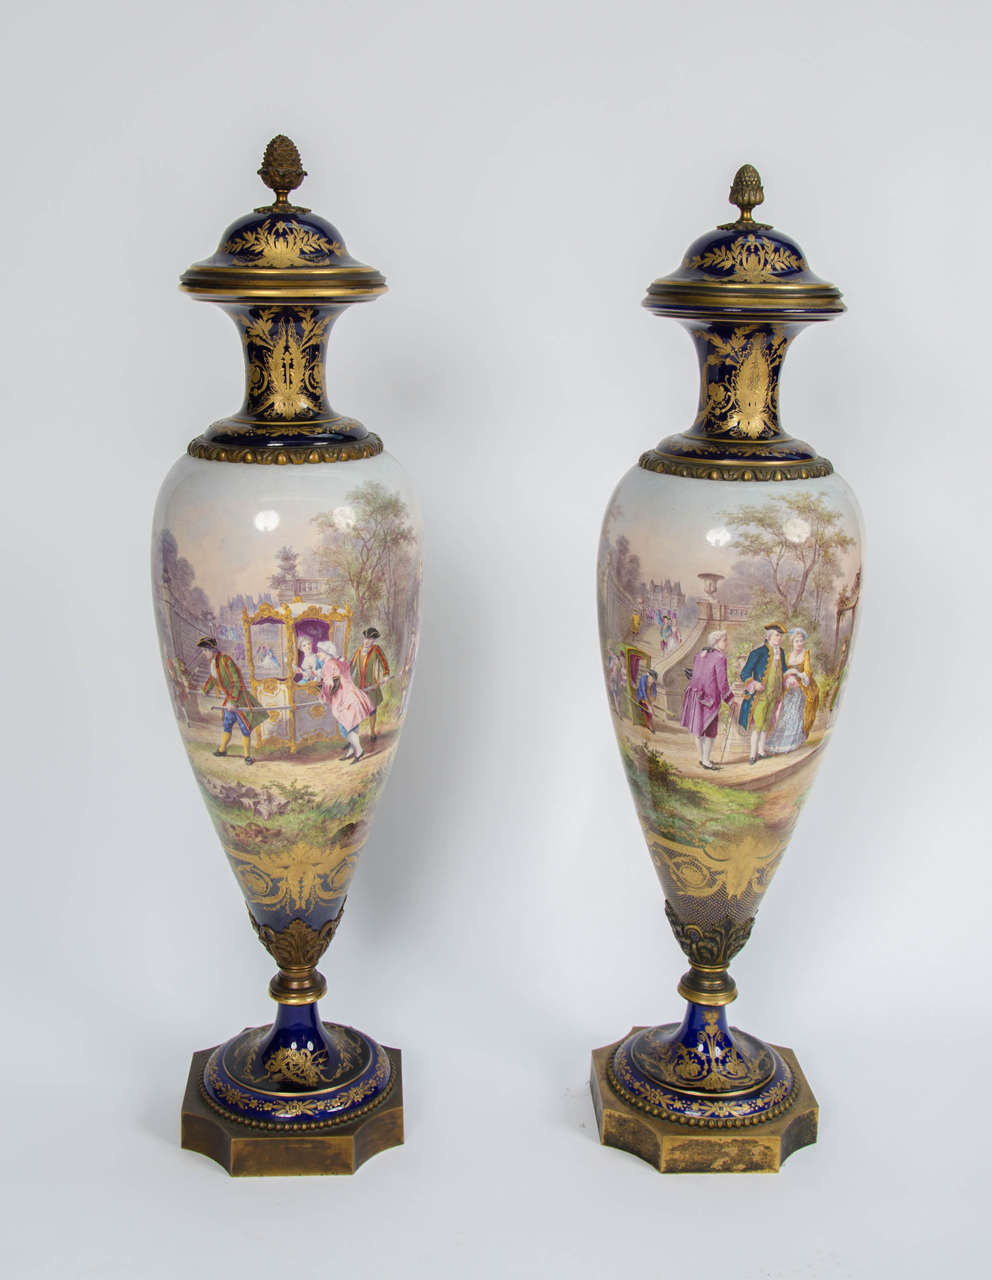 A very good quality pair of French Sèvres Porcelain, ormolu-mounted vases, depicting romantic scenes. 
Signed; 'H. Desprez'.